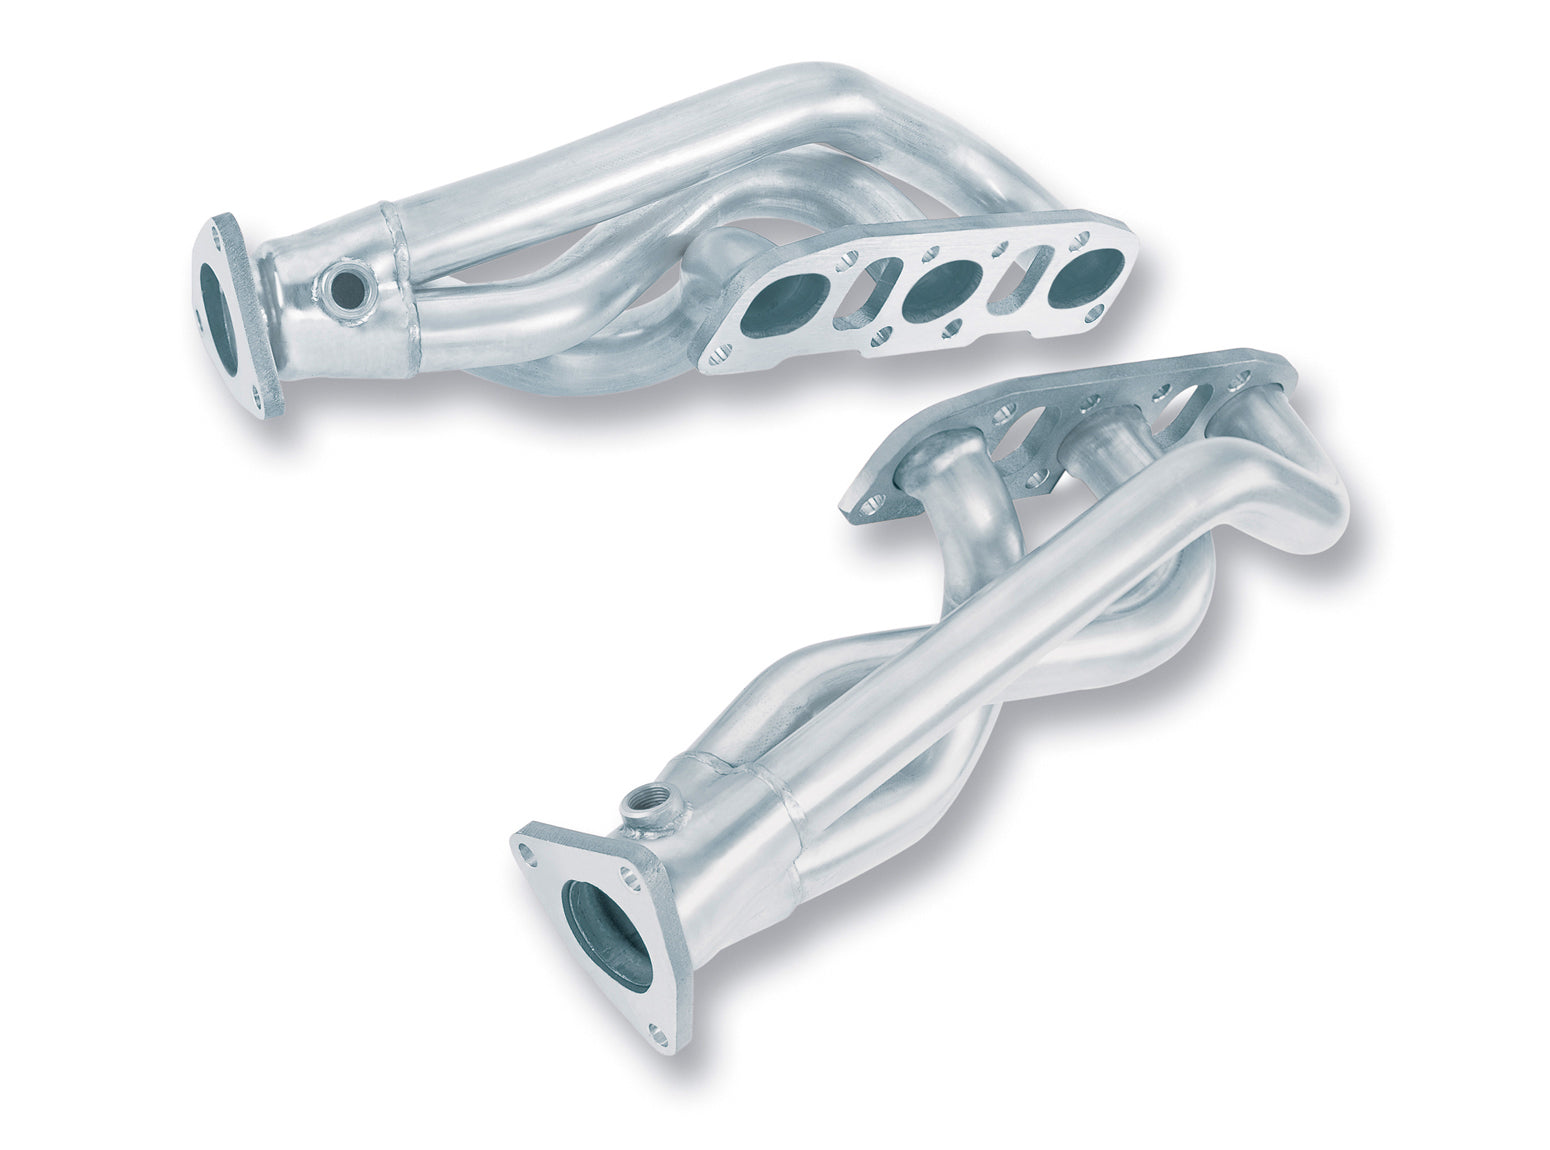 350Z/ G35 Coupe 2003-2007 Headers